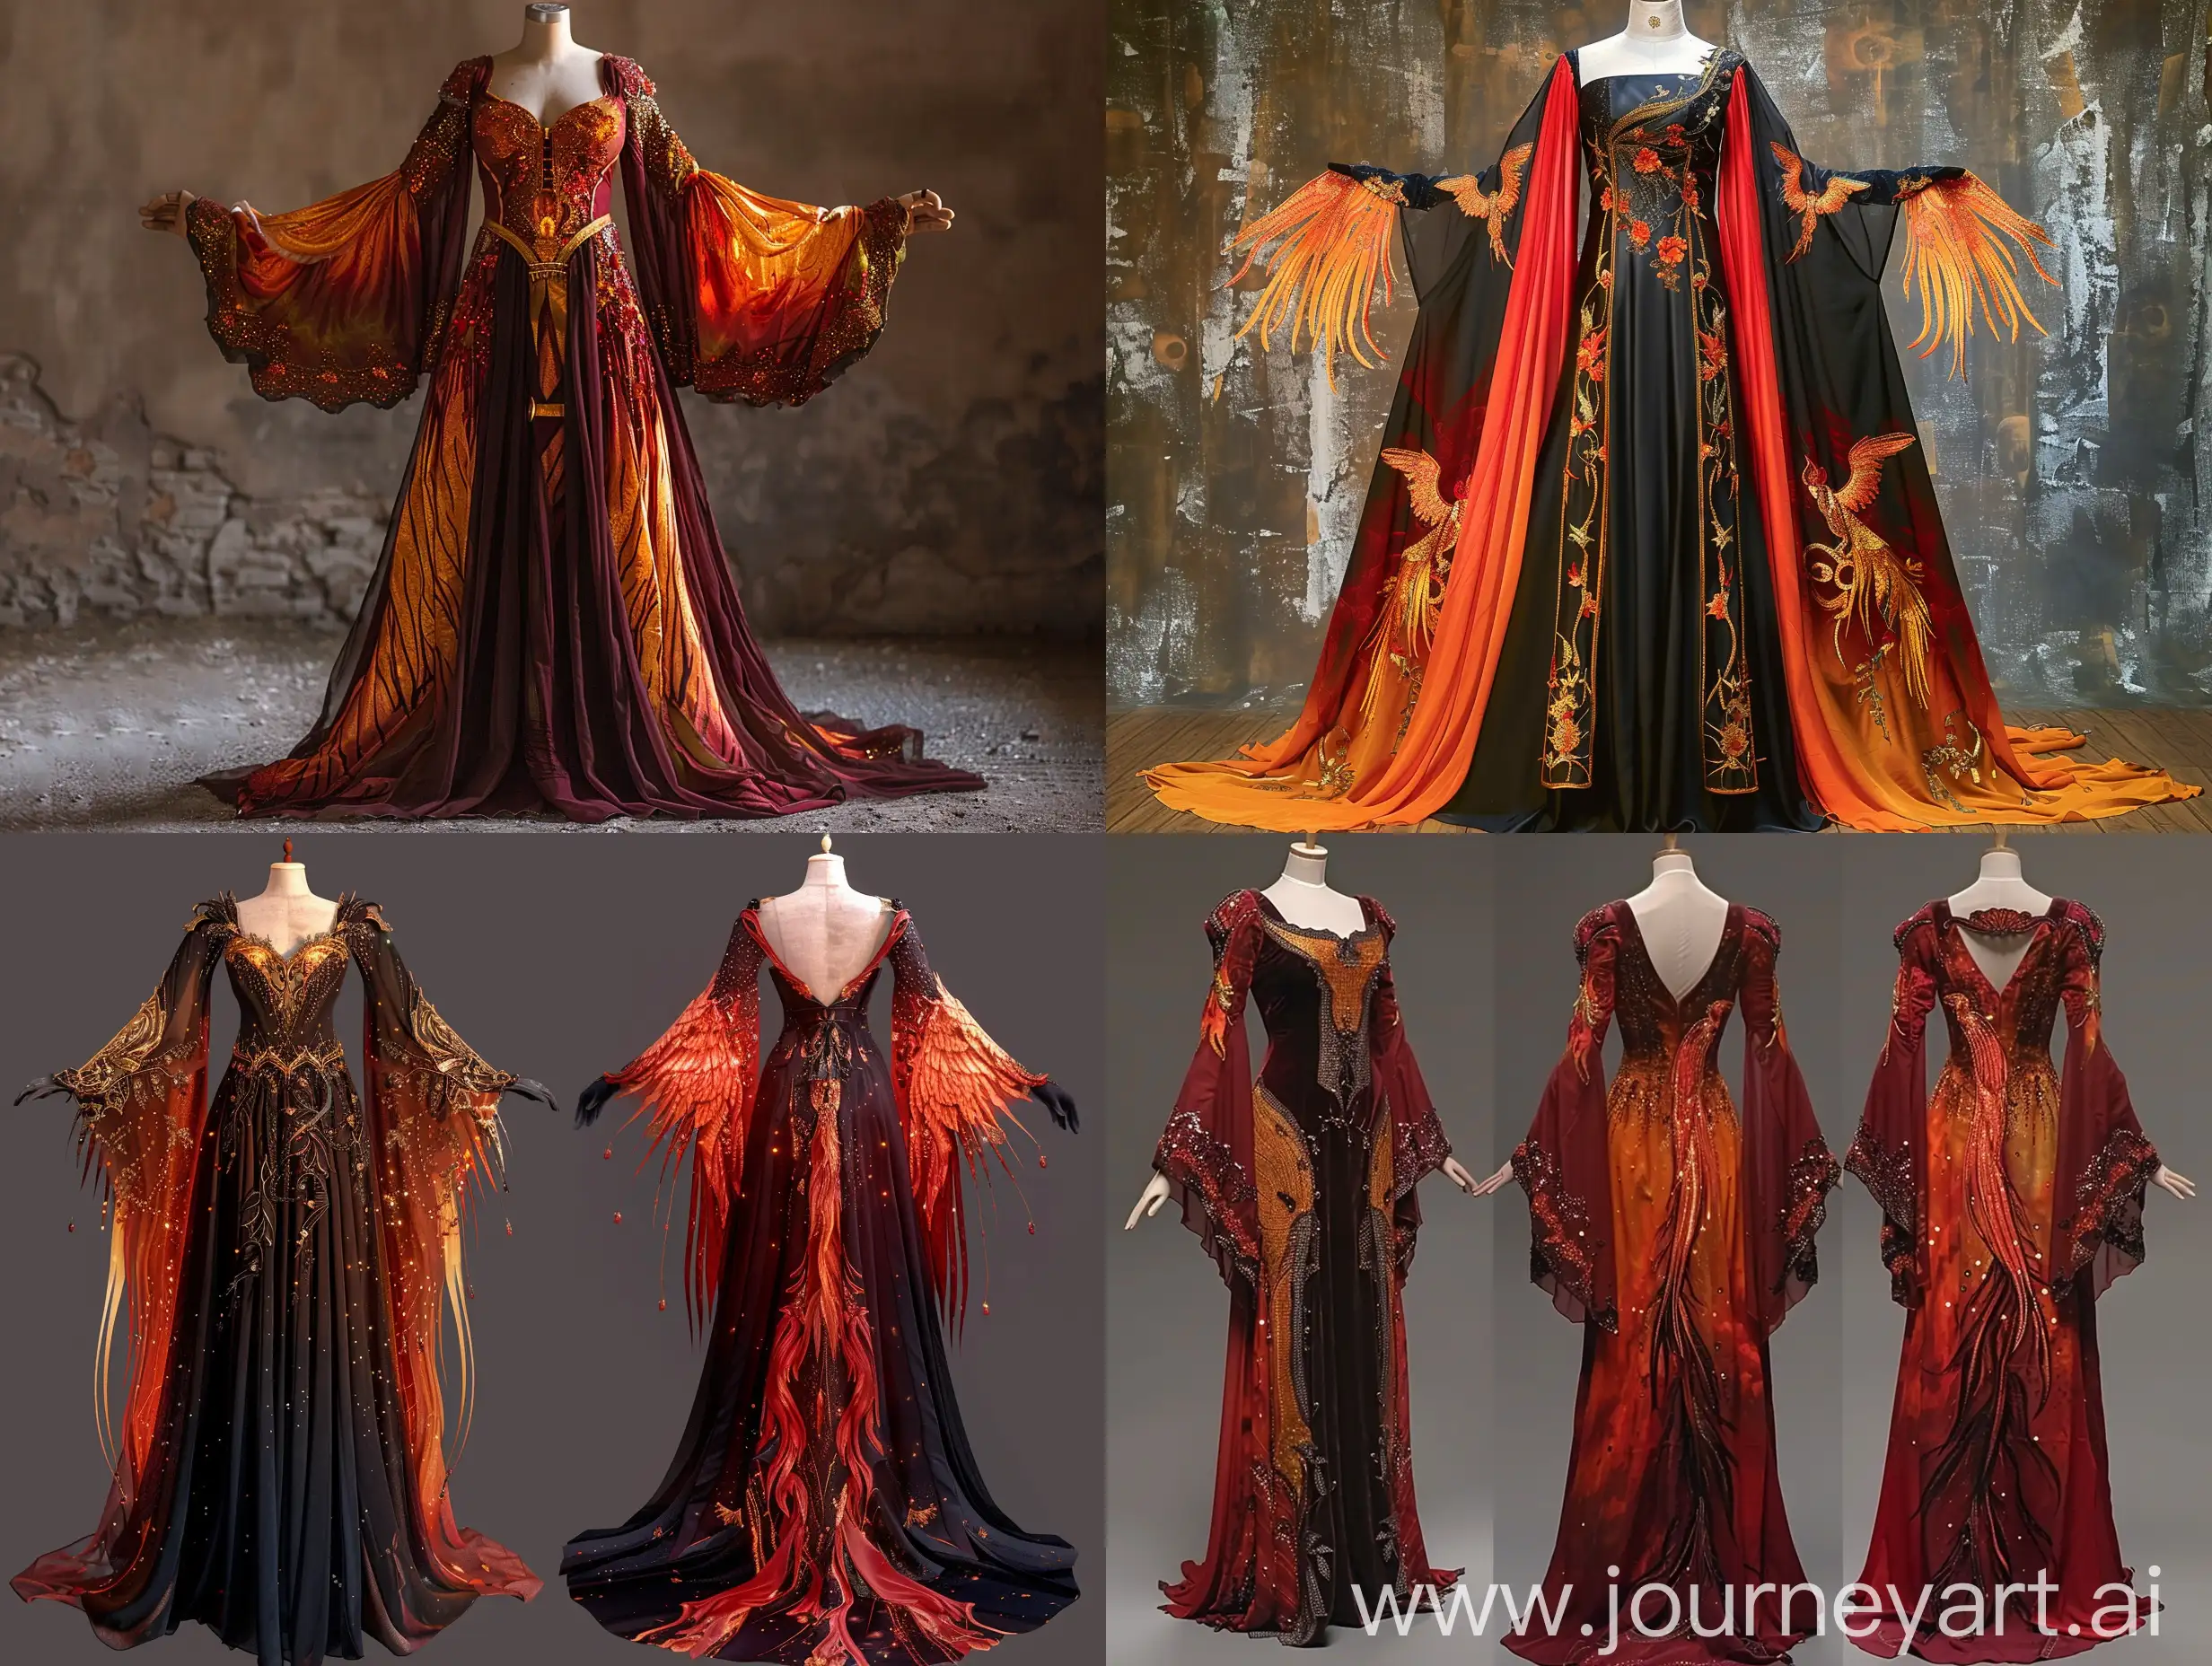 Design me a feminine and aristocratic custom dress inspired by phoenix and fire, with very long sleeves and length. Also, the clothes should have many and detailed details